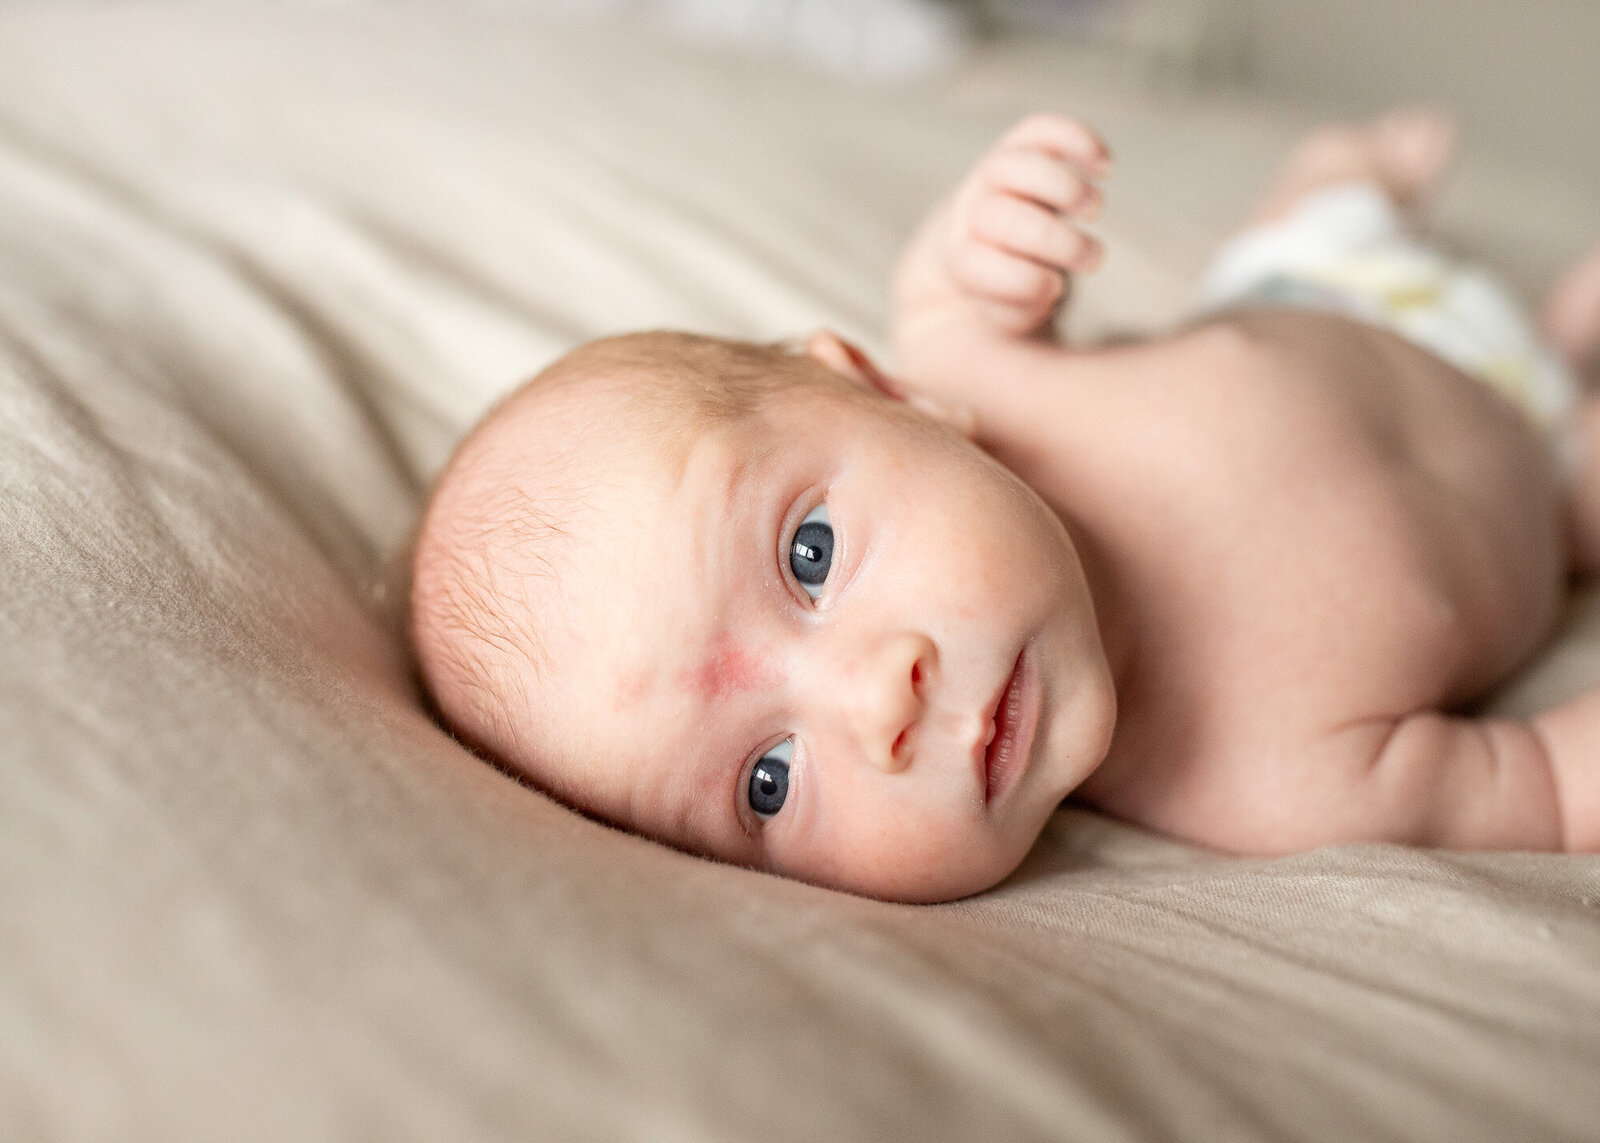 Newborn baby laying on neutral colored bedding.